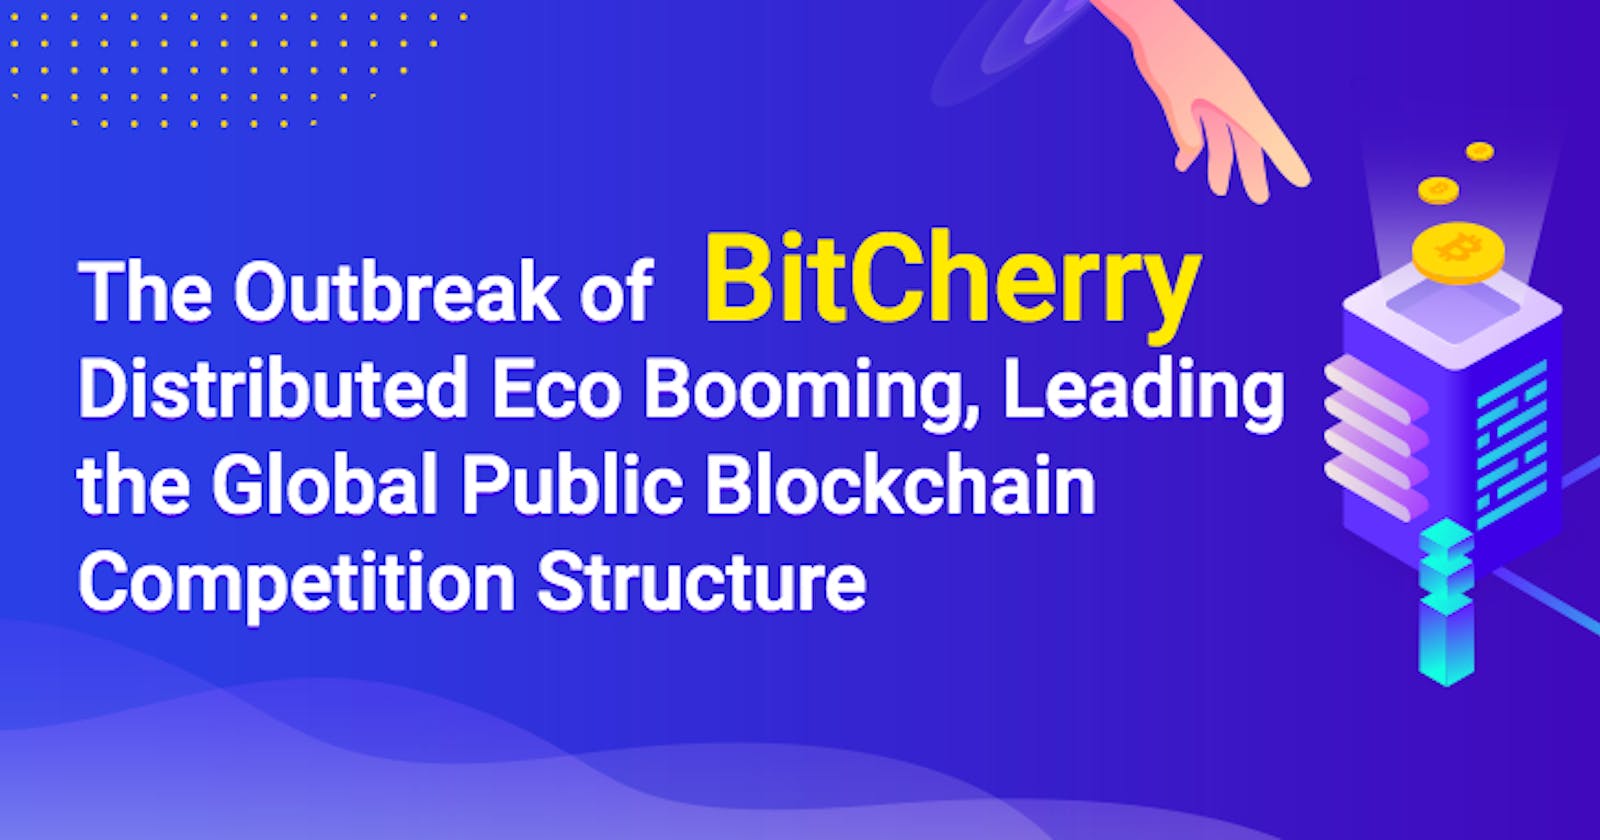 The Outbreak of BitCherry Distributed Eco Booming, Leading the Global Public Blockchain Competition Structure